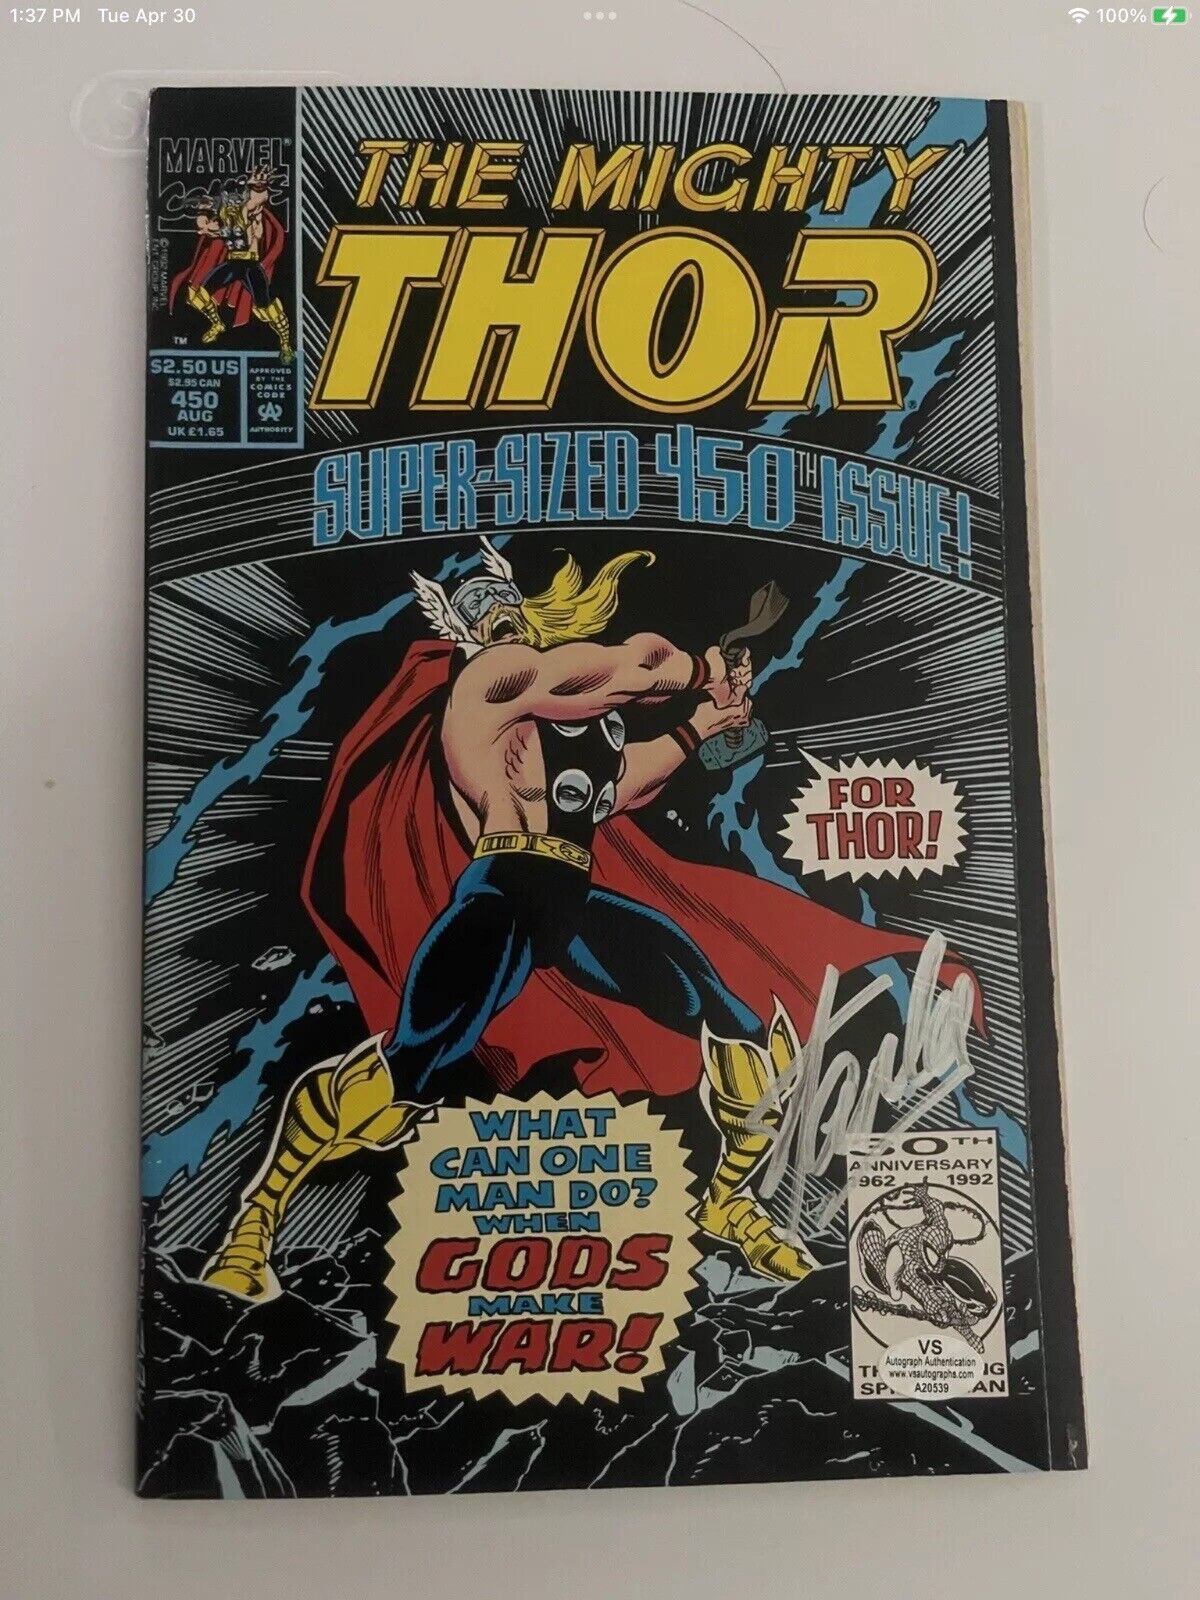 The Mighty Thor #450 Signed By Stan Lee w/COA Beautiful Avengers